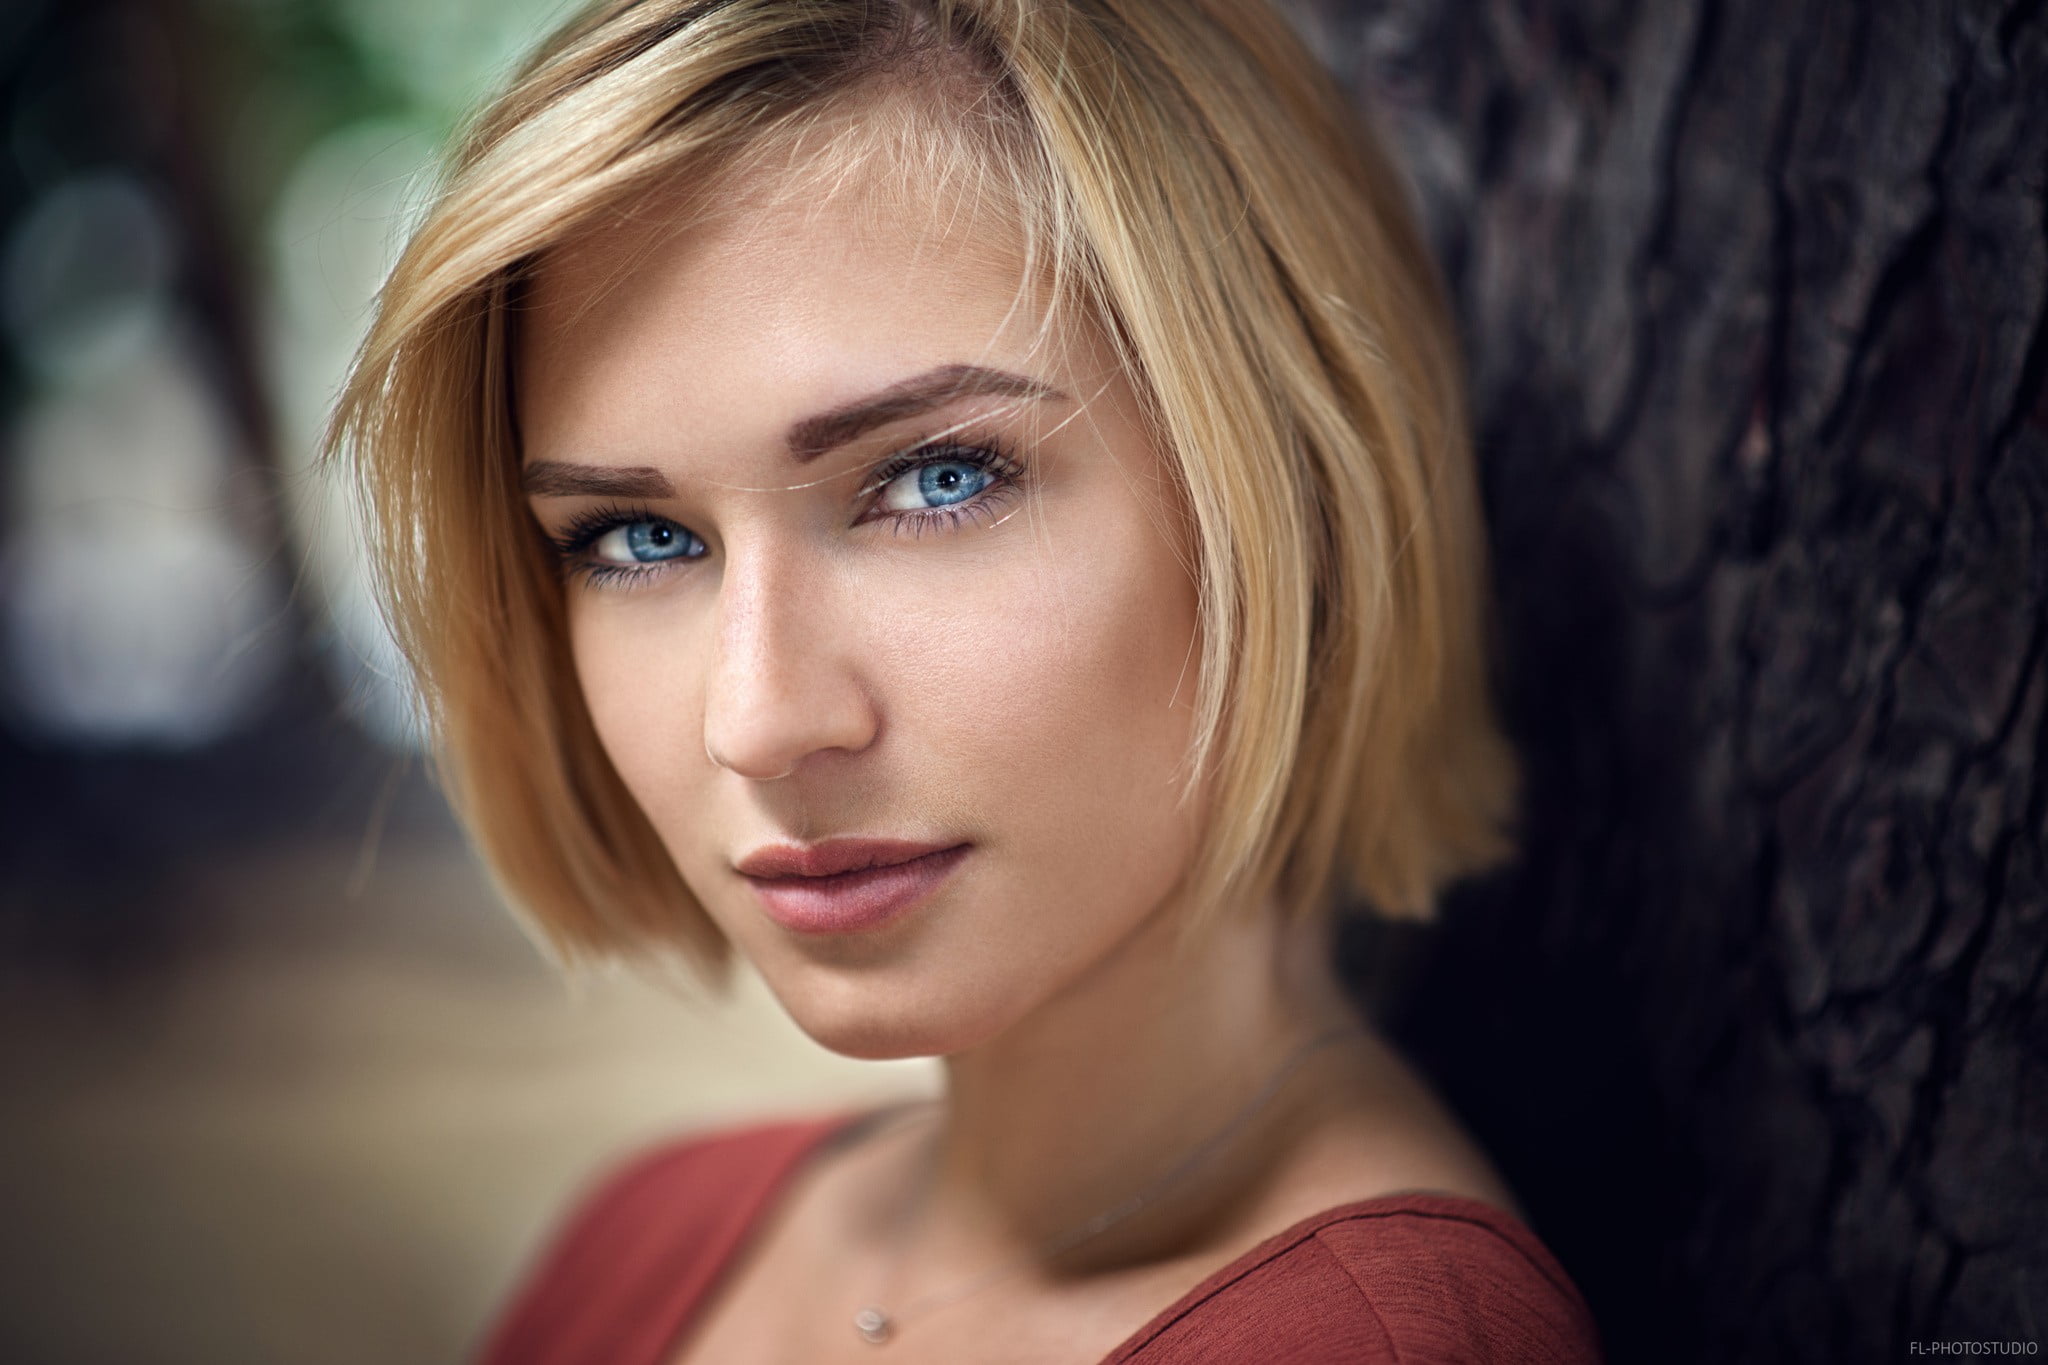 Beauty Portrait with Blue Eyes and Hair - wide 7